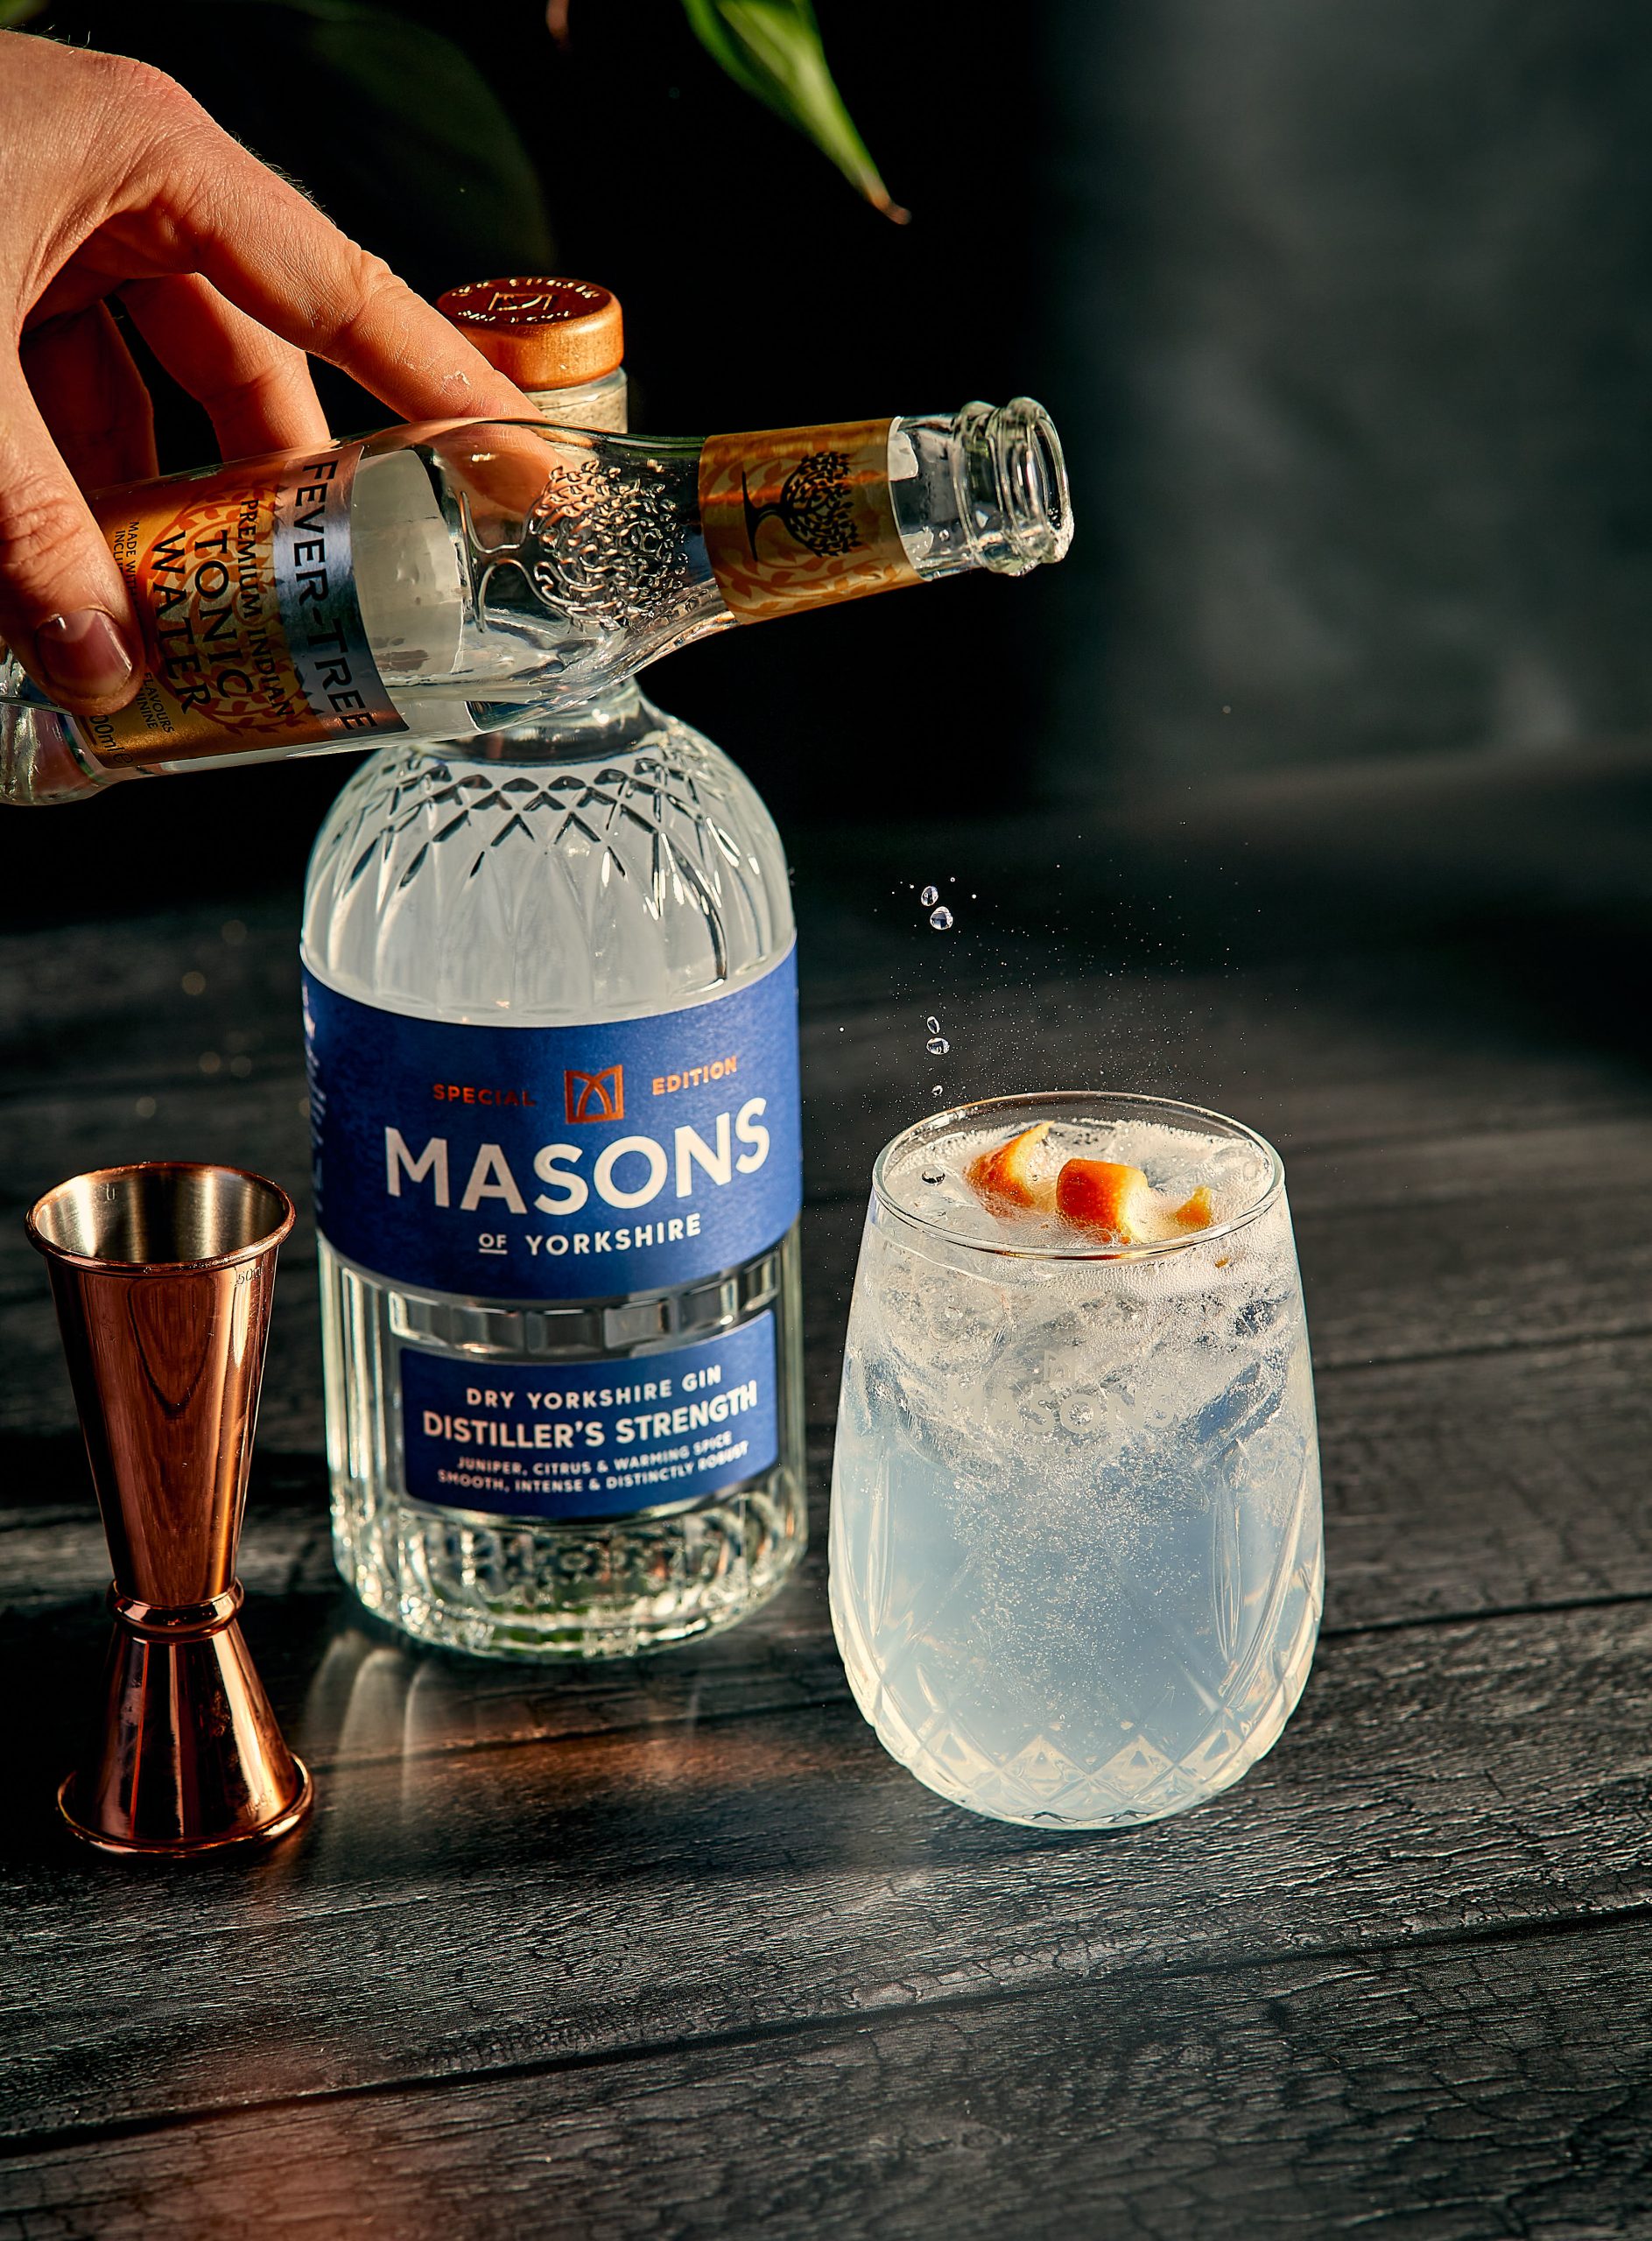 New distiller’s strength high-proof gin from Masons of Yorkshire